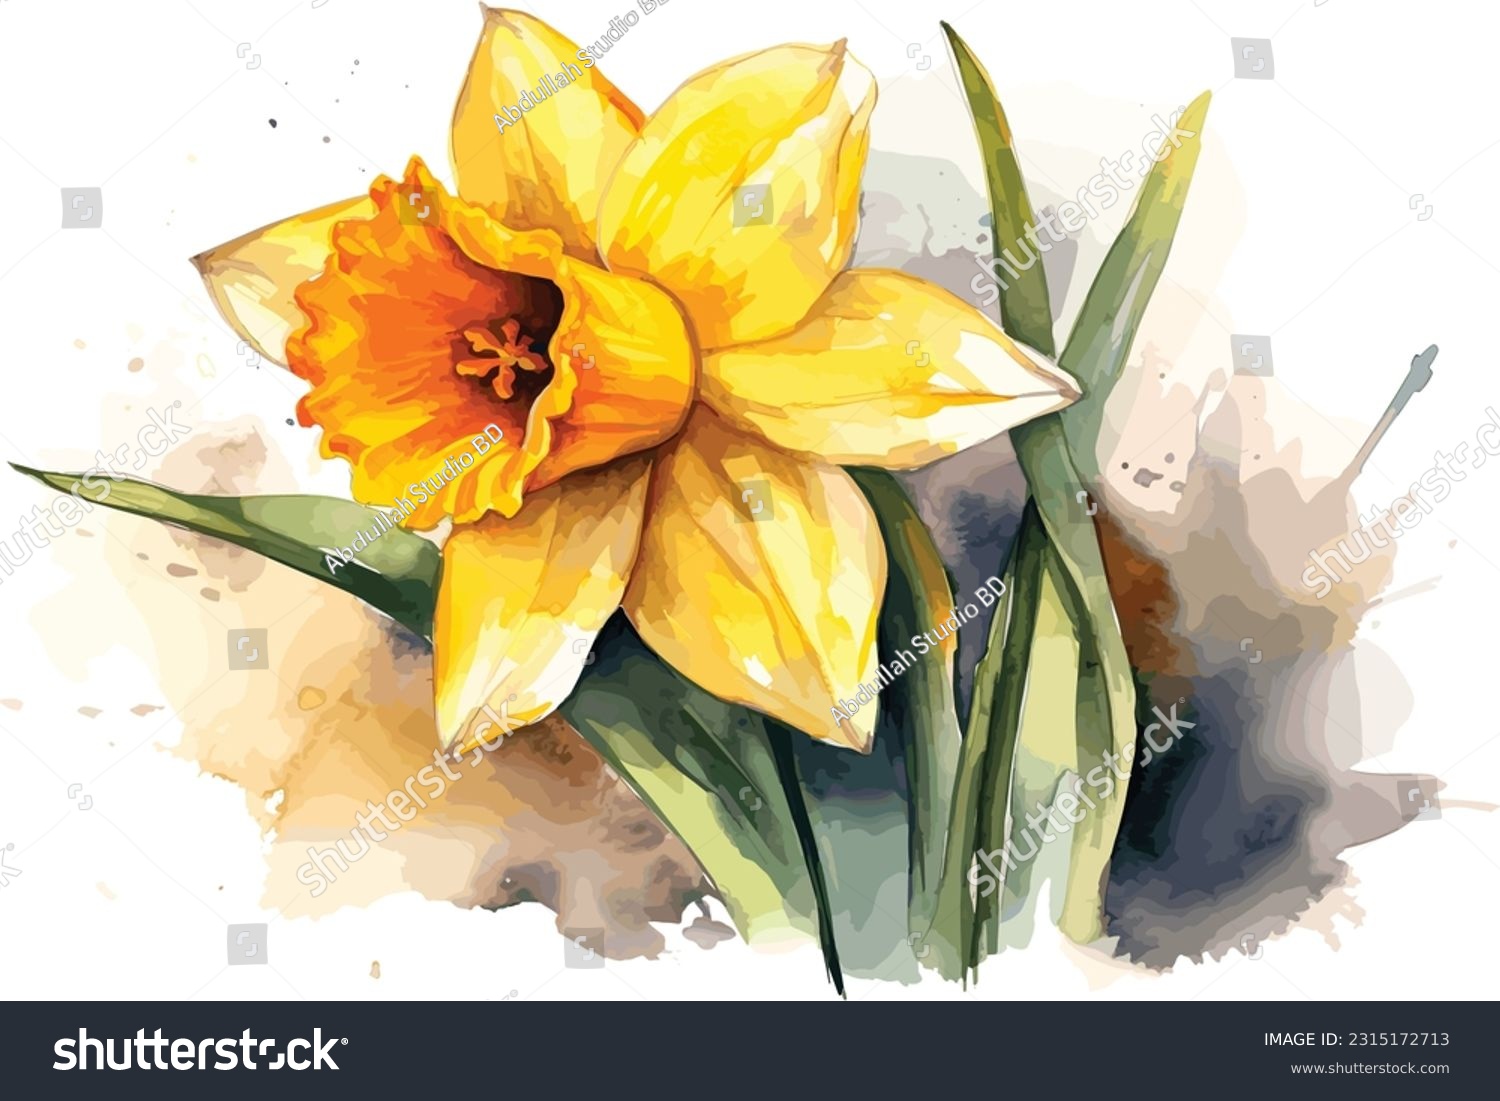 SVG of Flowers watercolor illustration, Vector flowers and leaves, with color splash and white background.  svg